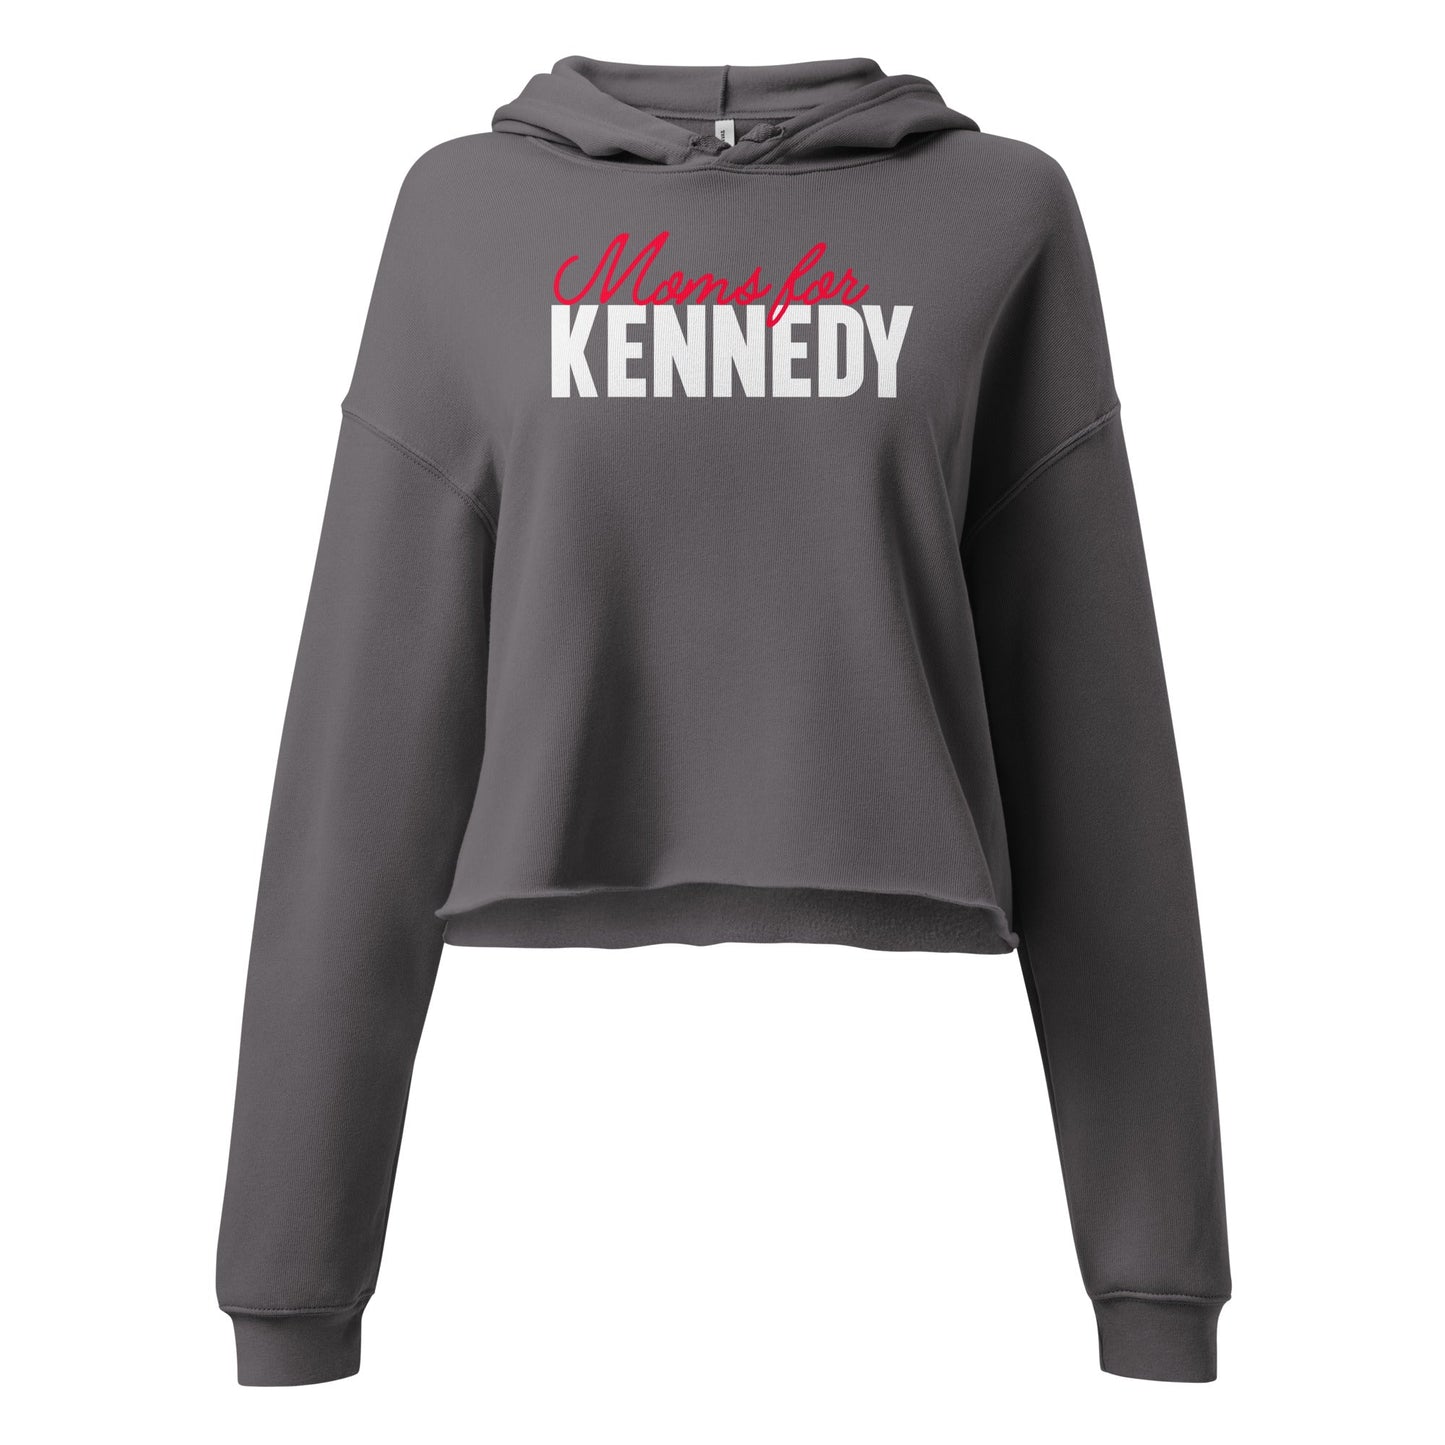 Moms for Kennedy Crop Hoodie - TEAM KENNEDY. All rights reserved